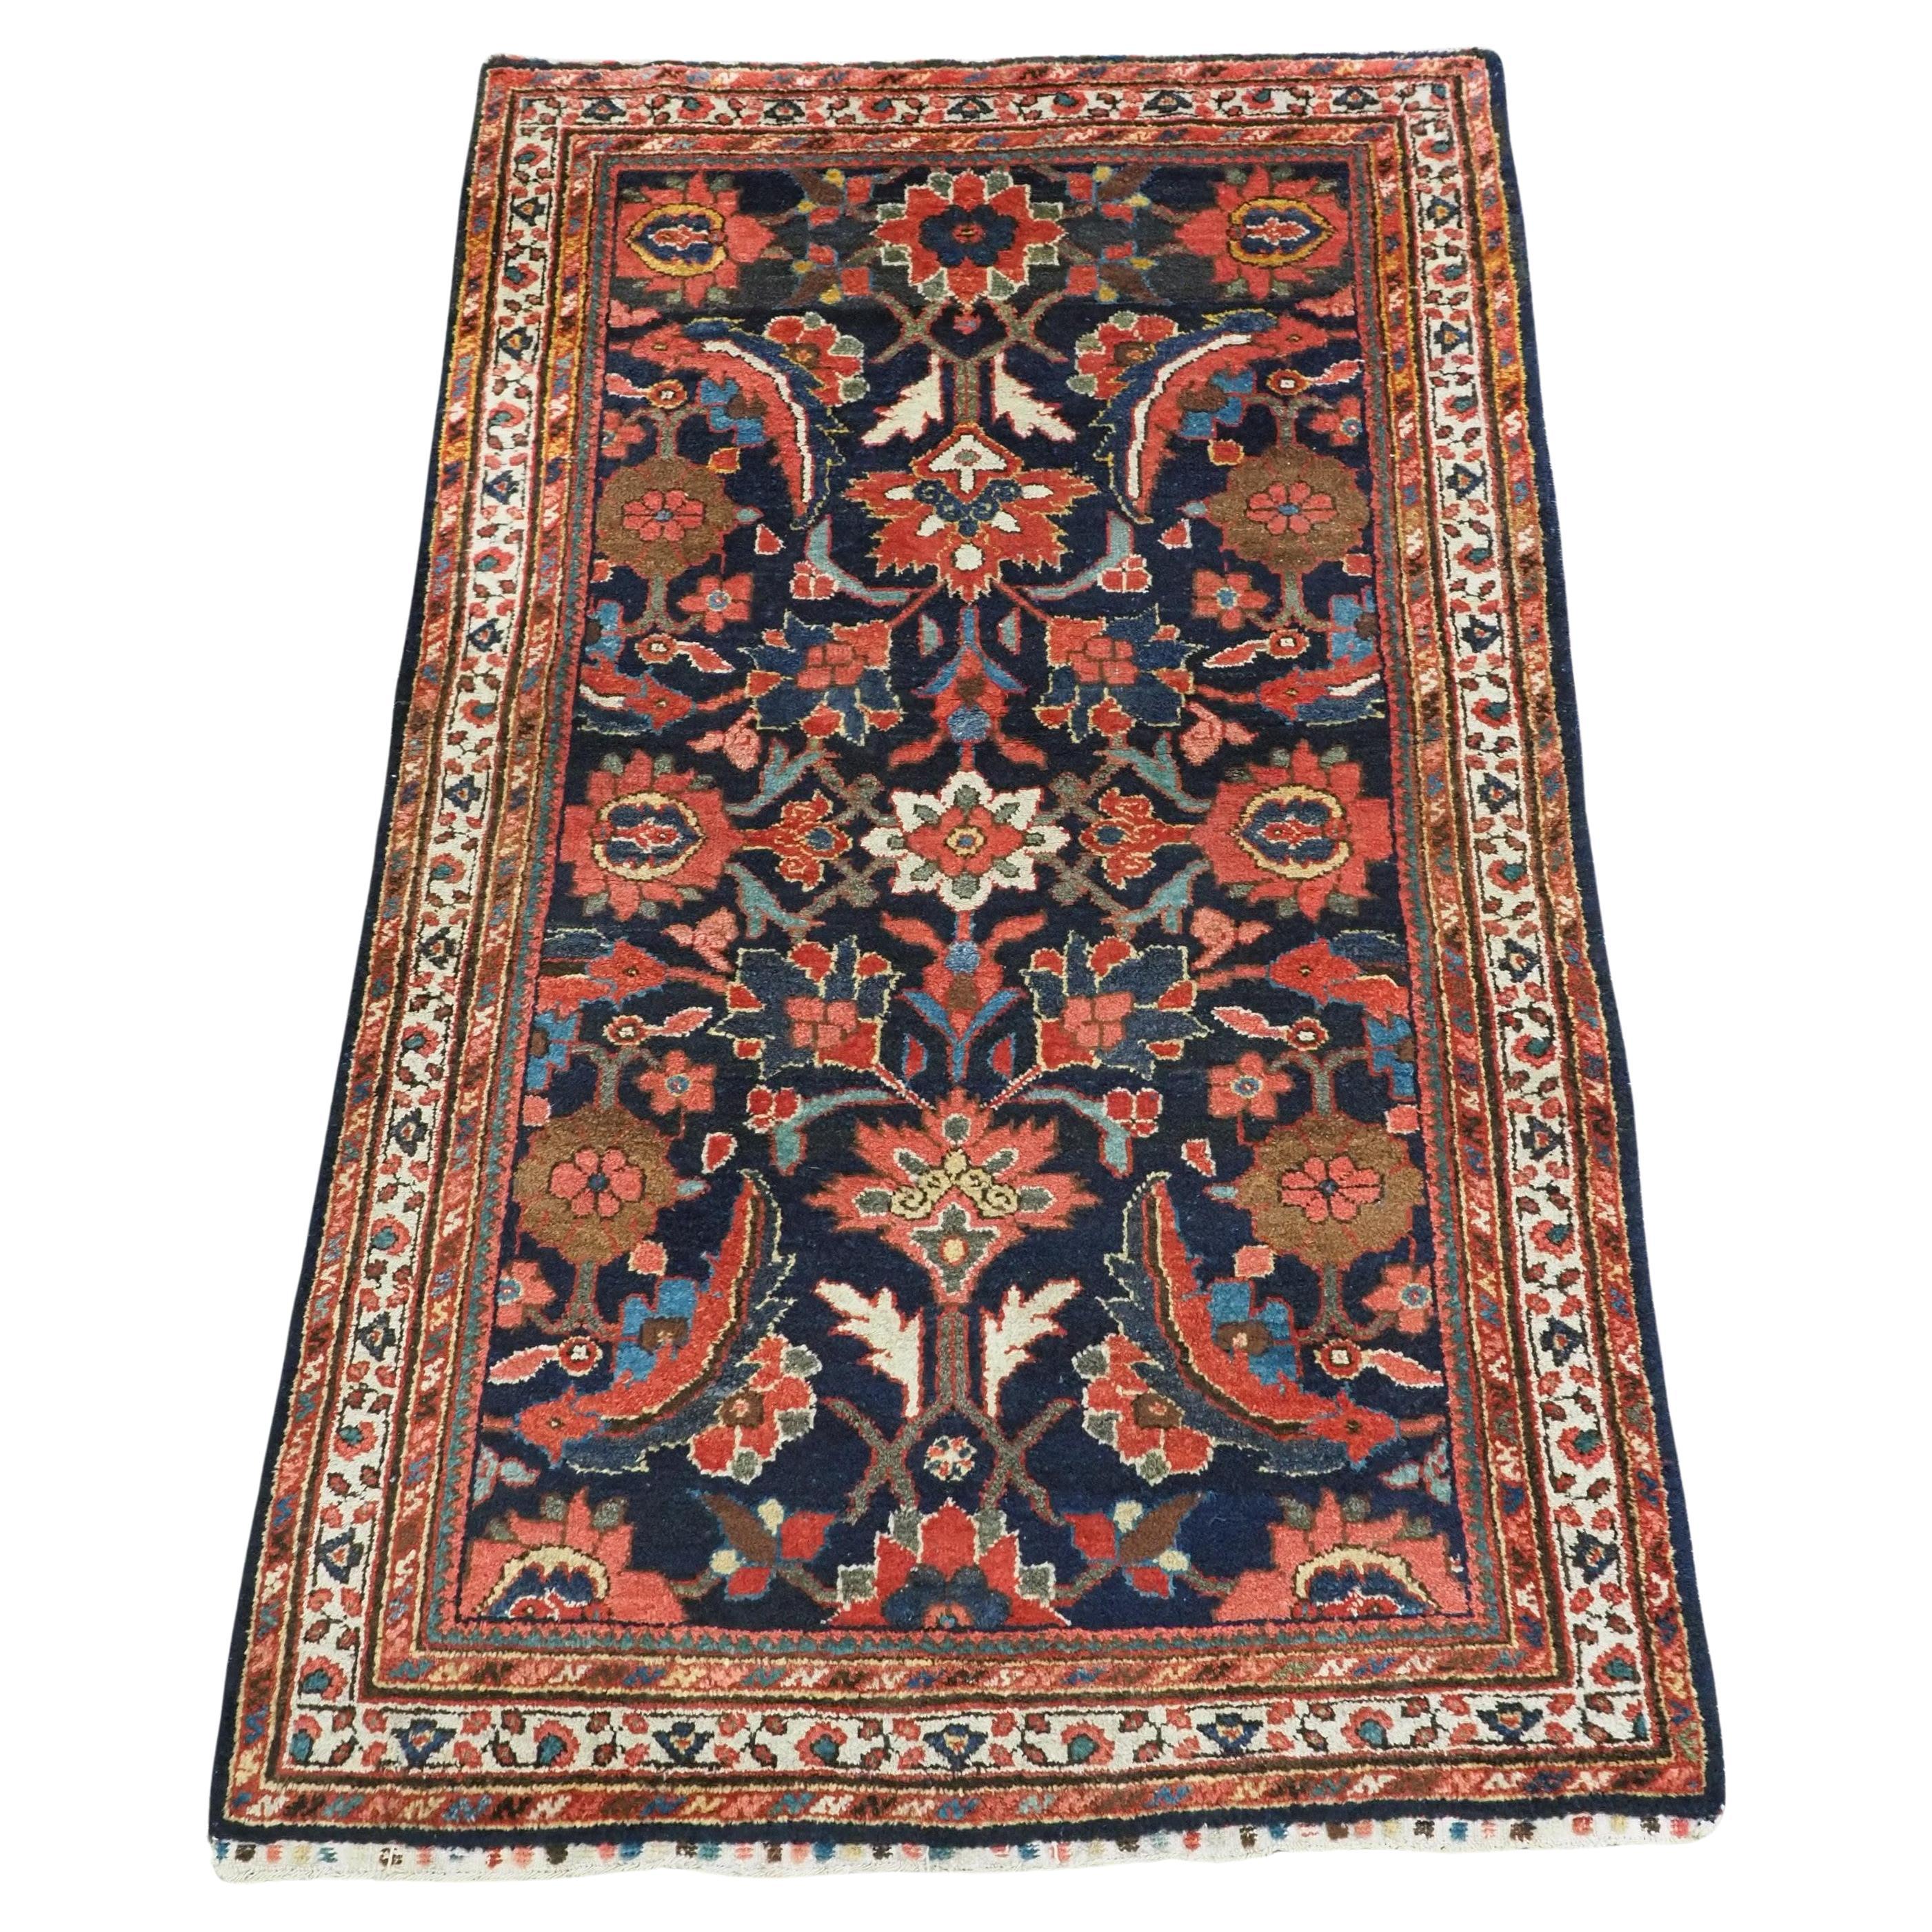  Antique Mahal rug with large scale floral design.  Circa 1920.